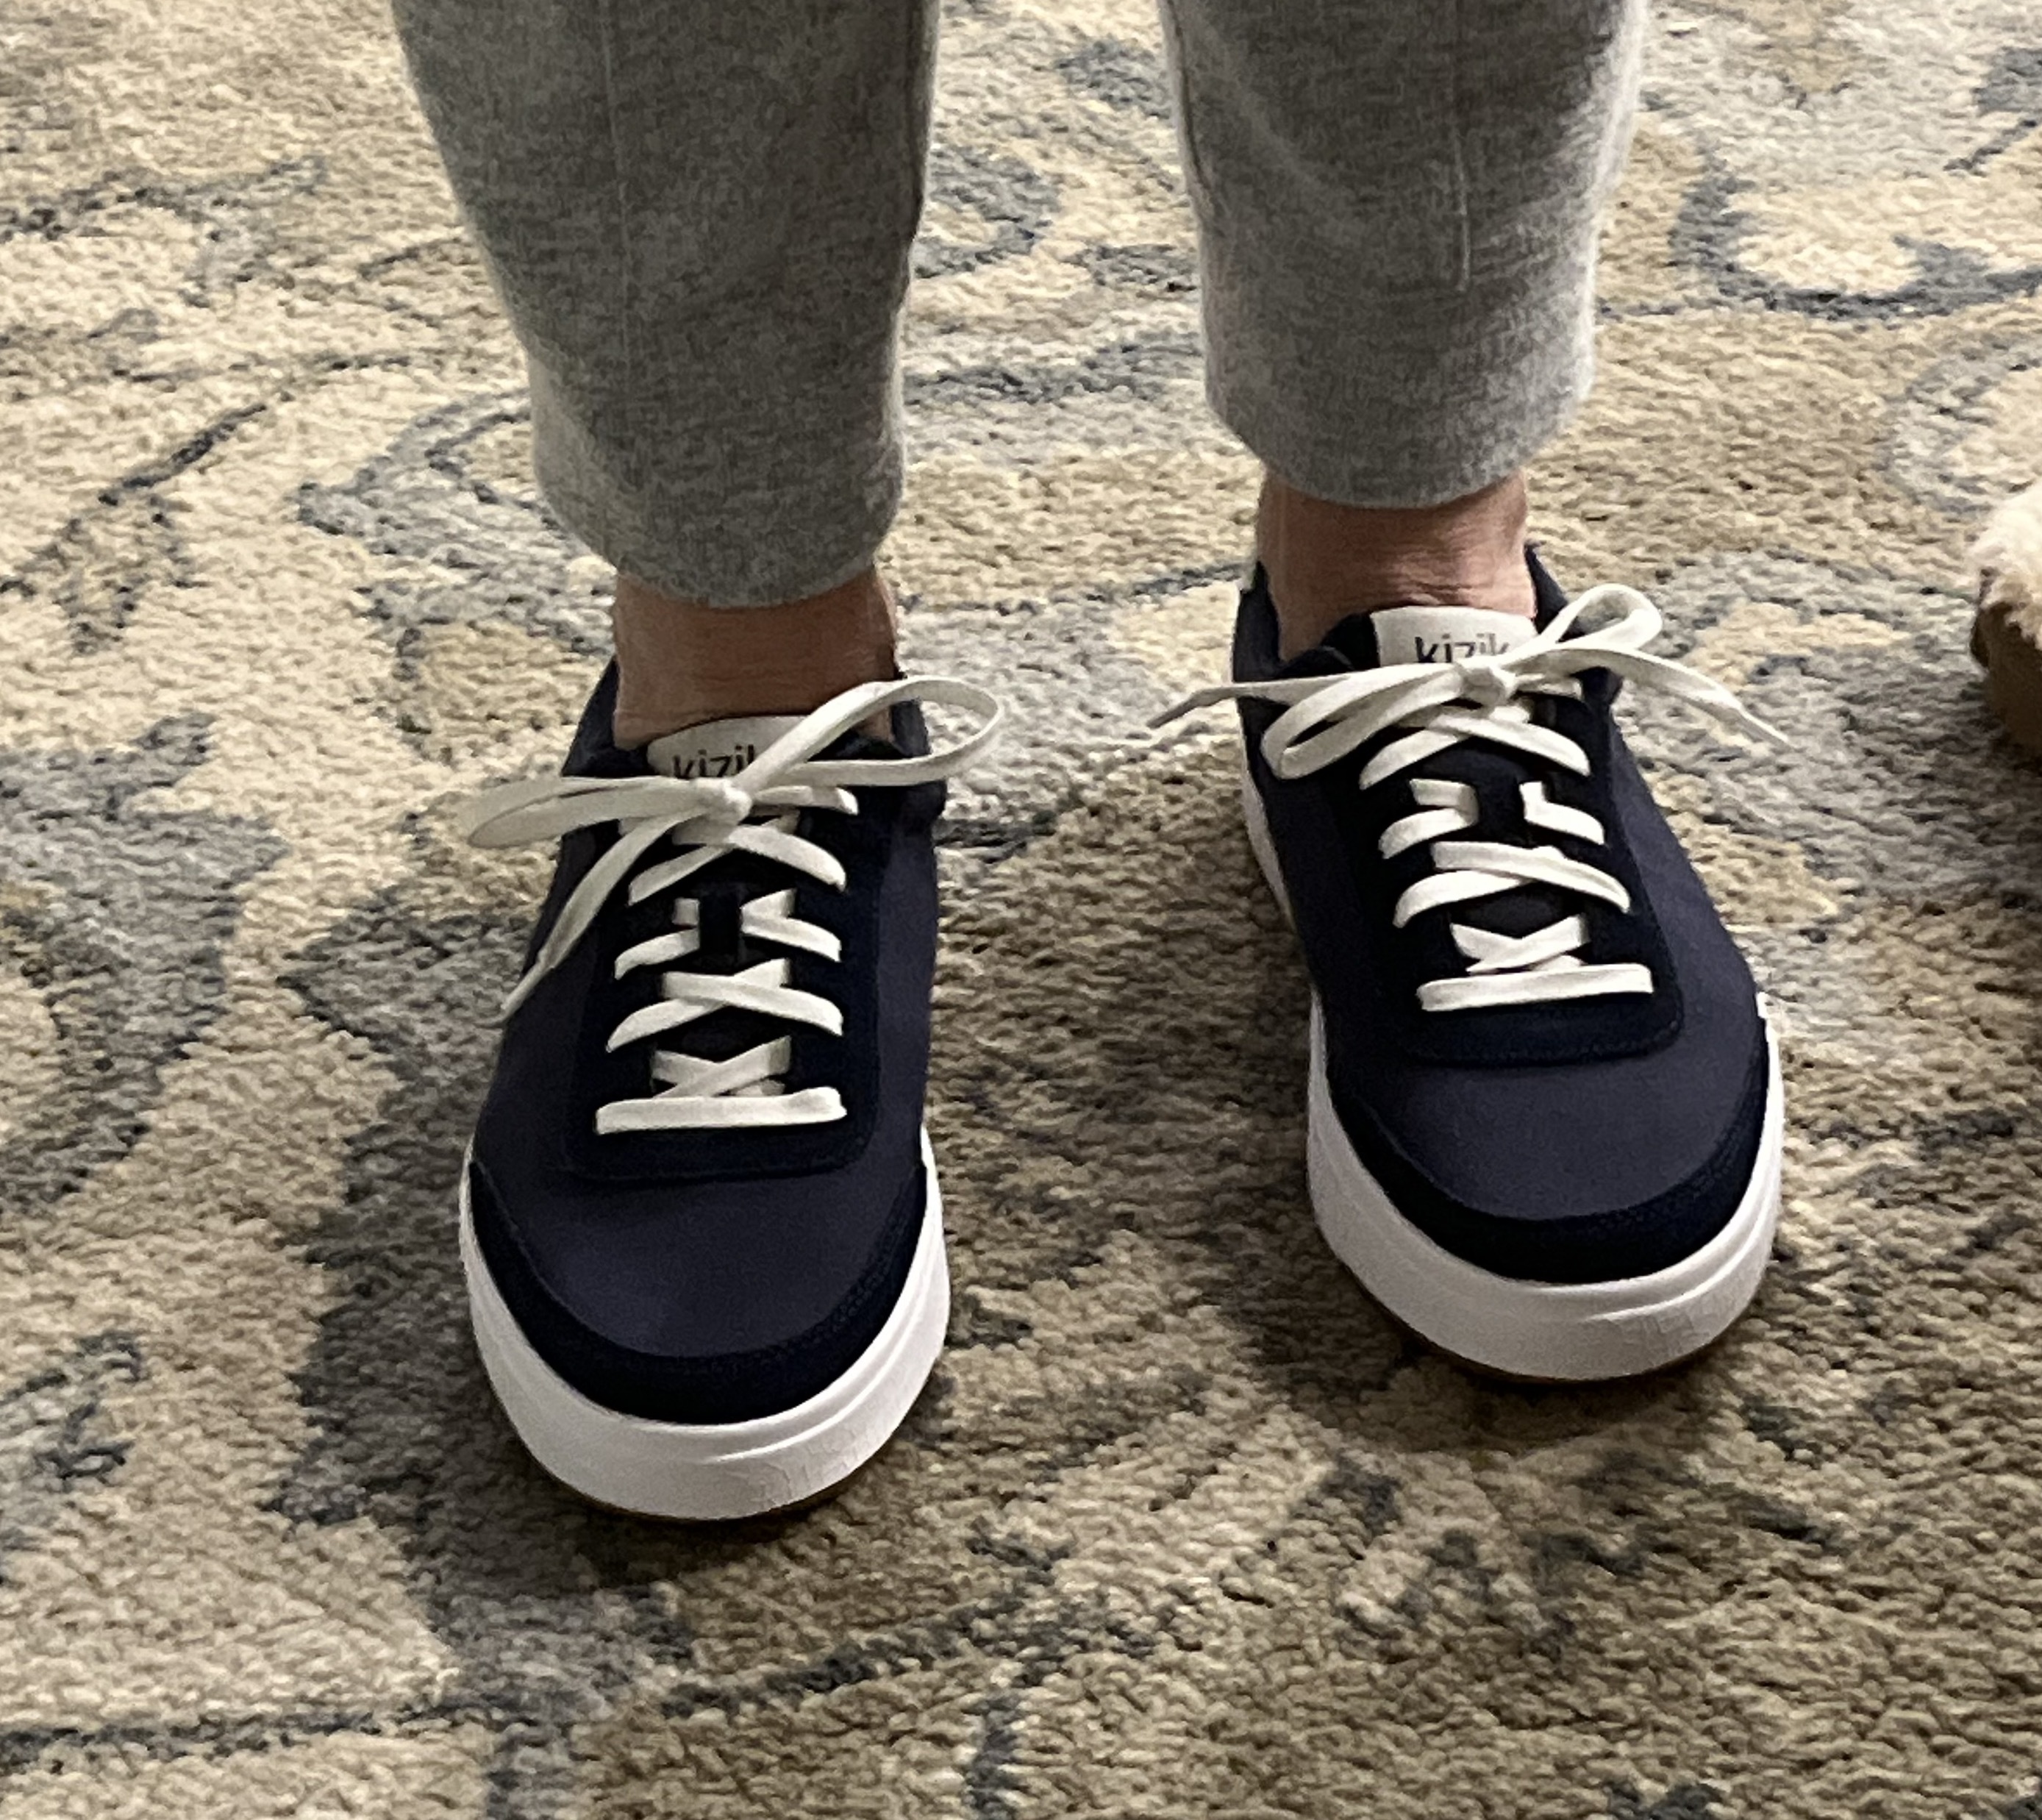 Reviewer wearing the navy shoes